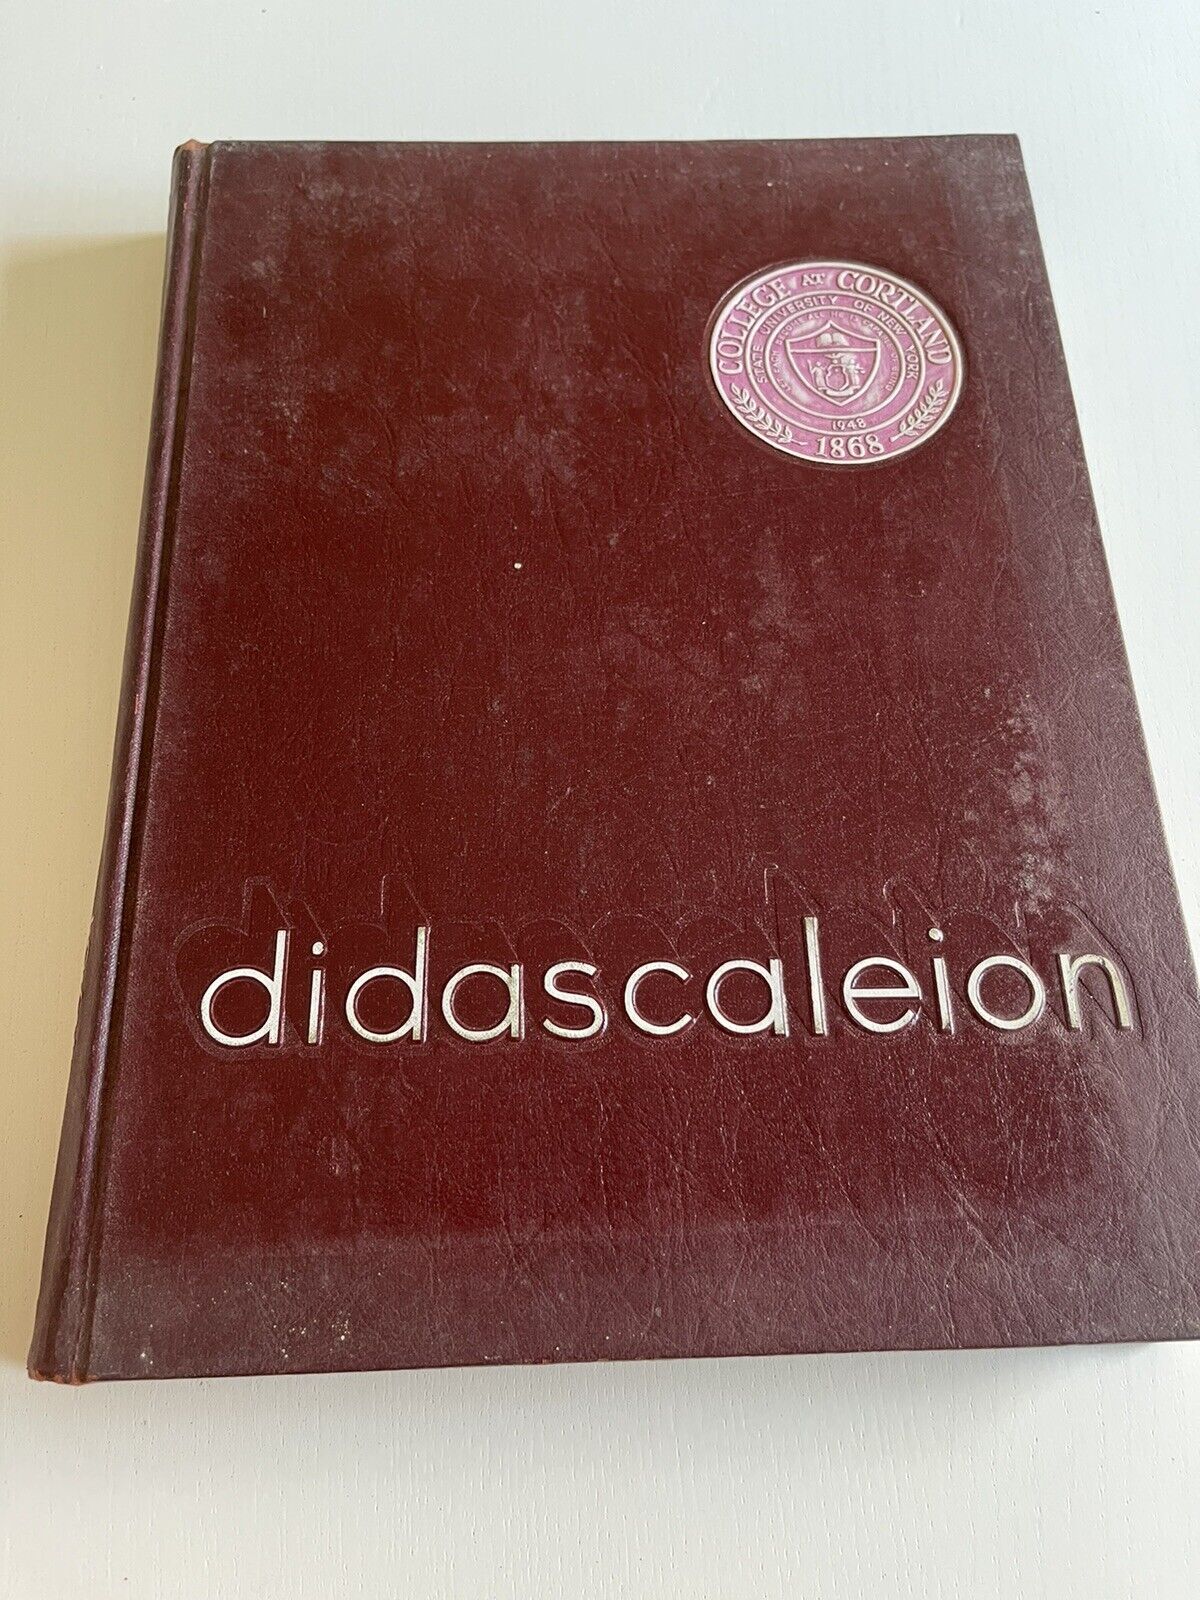 Didascaleion, 1964 State University of New York College at Cortland